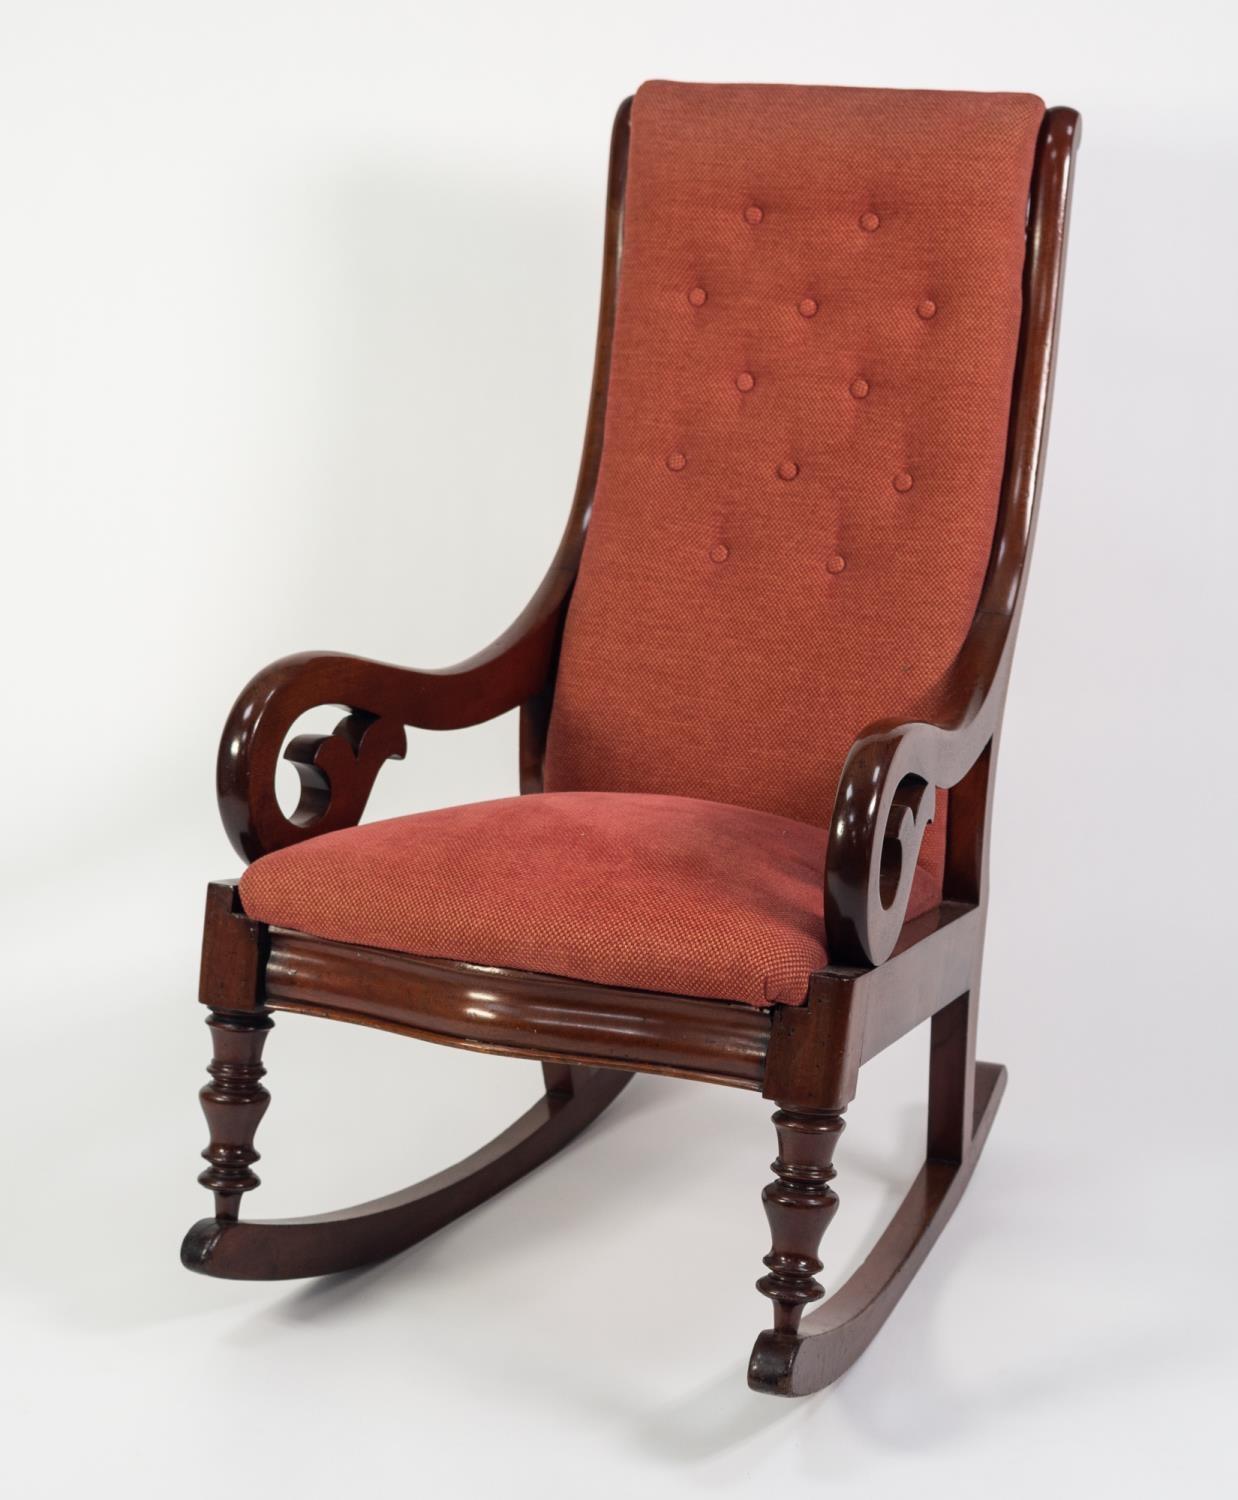 VICTORIAN MAHOGANY ROCKING CHAIR, the moulded show wood frame with buttoned, padded back and - Image 2 of 3